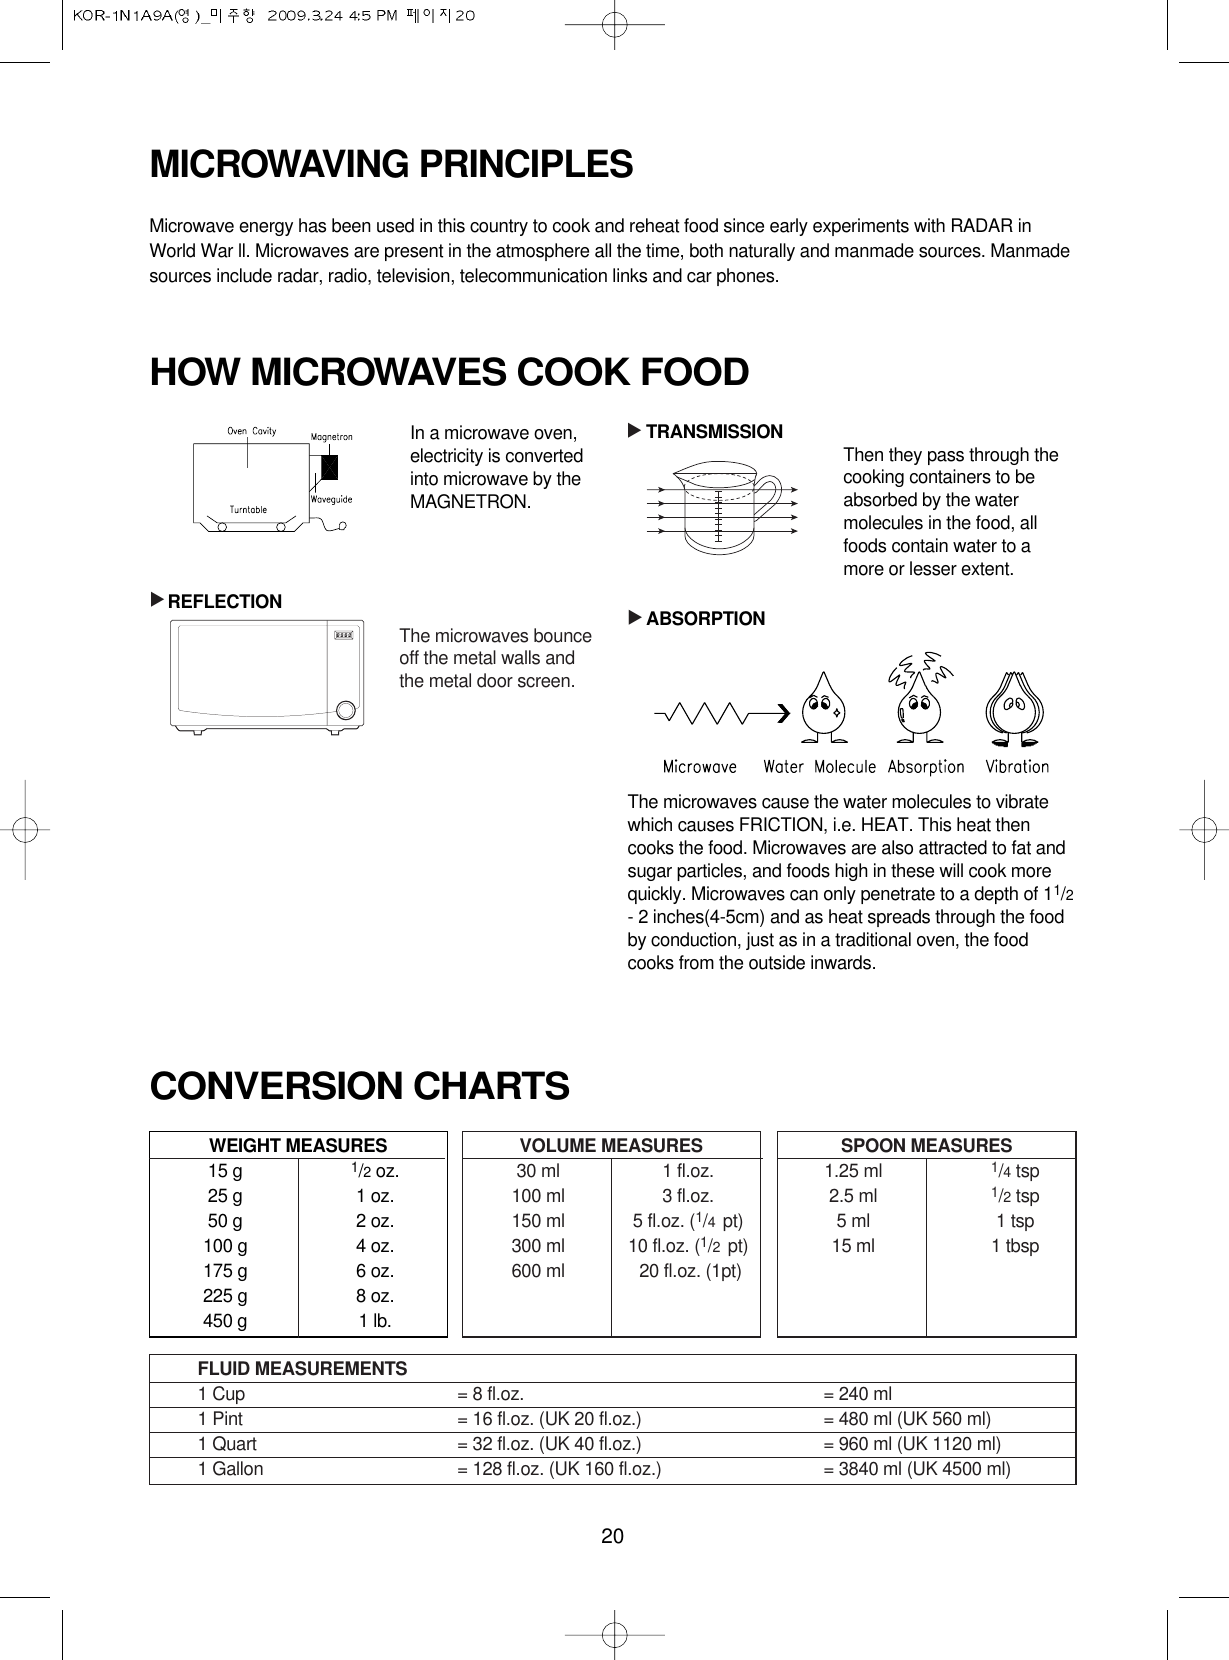 20MICROWAVING PRINCIPLESMicrowave energy has been used in this country to cook and reheat food since early experiments with RADAR inWorld War ll. Microwaves are present in the atmosphere all the time, both naturally and manmade sources. Manmadesources include radar, radio, television, telecommunication links and car phones.CONVERSION CHARTSIn a microwave oven,electricity is convertedinto microwave by theMAGNETRON.REFLECTIONTRANSMISSION Then they pass through thecooking containers to beabsorbed by the watermolecules in the food, allfoods contain water to amore or lesser extent.ABSORPTIONThe microwaves cause the water molecules to vibratewhich causes FRICTION, i.e. HEAT. This heat thencooks the food. Microwaves are also attracted to fat andsugar particles, and foods high in these will cook morequickly. Microwaves can only penetrate to a depth of 11/2- 2 inches(4-5cm) and as heat spreads through the foodby conduction, just as in a traditional oven, the foodcooks from the outside inwards.WEIGHT MEASURES15 g 1/2oz.25 g 1 oz.50 g 2 oz.100 g 4 oz.175 g 6 oz.225 g 8 oz.450 g 1 lb.HOW MICROWAVES COOK FOOD▲▲▲VOLUME MEASURES30 ml 1 fl.oz.100 ml 3 fl.oz.150 ml 5 fl.oz. (1/4  pt)300 ml 10 fl.oz. (1/2  pt)600 ml 20 fl.oz. (1pt)SPOON MEASURES1.25 ml 1/4tsp2.5 ml 1/2tsp5 ml 1 tsp15 ml 1 tbspFLUID MEASUREMENTS1 Cup = 8 fl.oz. = 240 ml1 Pint = 16 fl.oz. (UK 20 fl.oz.) = 480 ml (UK 560 ml)1 Quart = 32 fl.oz. (UK 40 fl.oz.) = 960 ml (UK 1120 ml)1 Gallon = 128 fl.oz. (UK 160 fl.oz.) = 3840 ml (UK 4500 ml)The microwaves bounceoff the metal walls andthe metal door screen.